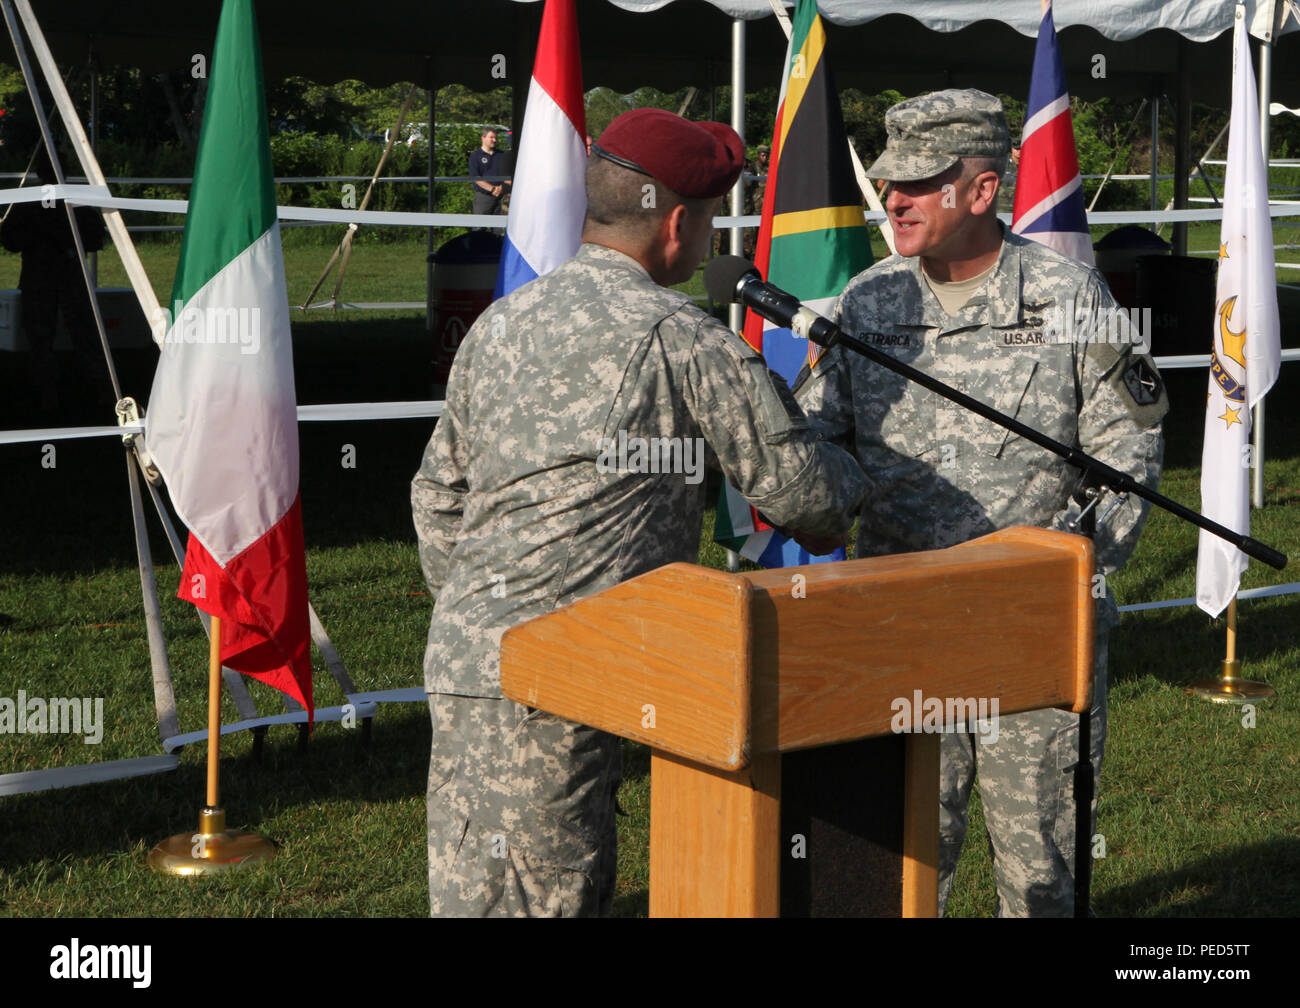 U.S. Army Brig. Gen. Charles Petrarcha, Rhode Island National Guard land forces component commander, receives the Leapfest coin from Lt. Col. David Neary, acting brigade commander of the 56th troop command, during Leapfest 2015 in West Kingston, R.I., Aug. 1, 2015. Leapfest is an International parachute competition hosted by the 56th Troop Command, Rhode Island National Guard to promote high level technical training and esprit de corps within the International Airborne community. (U.S. Army Photo by Spc. Joseph Cathey/Released) Stock Photo